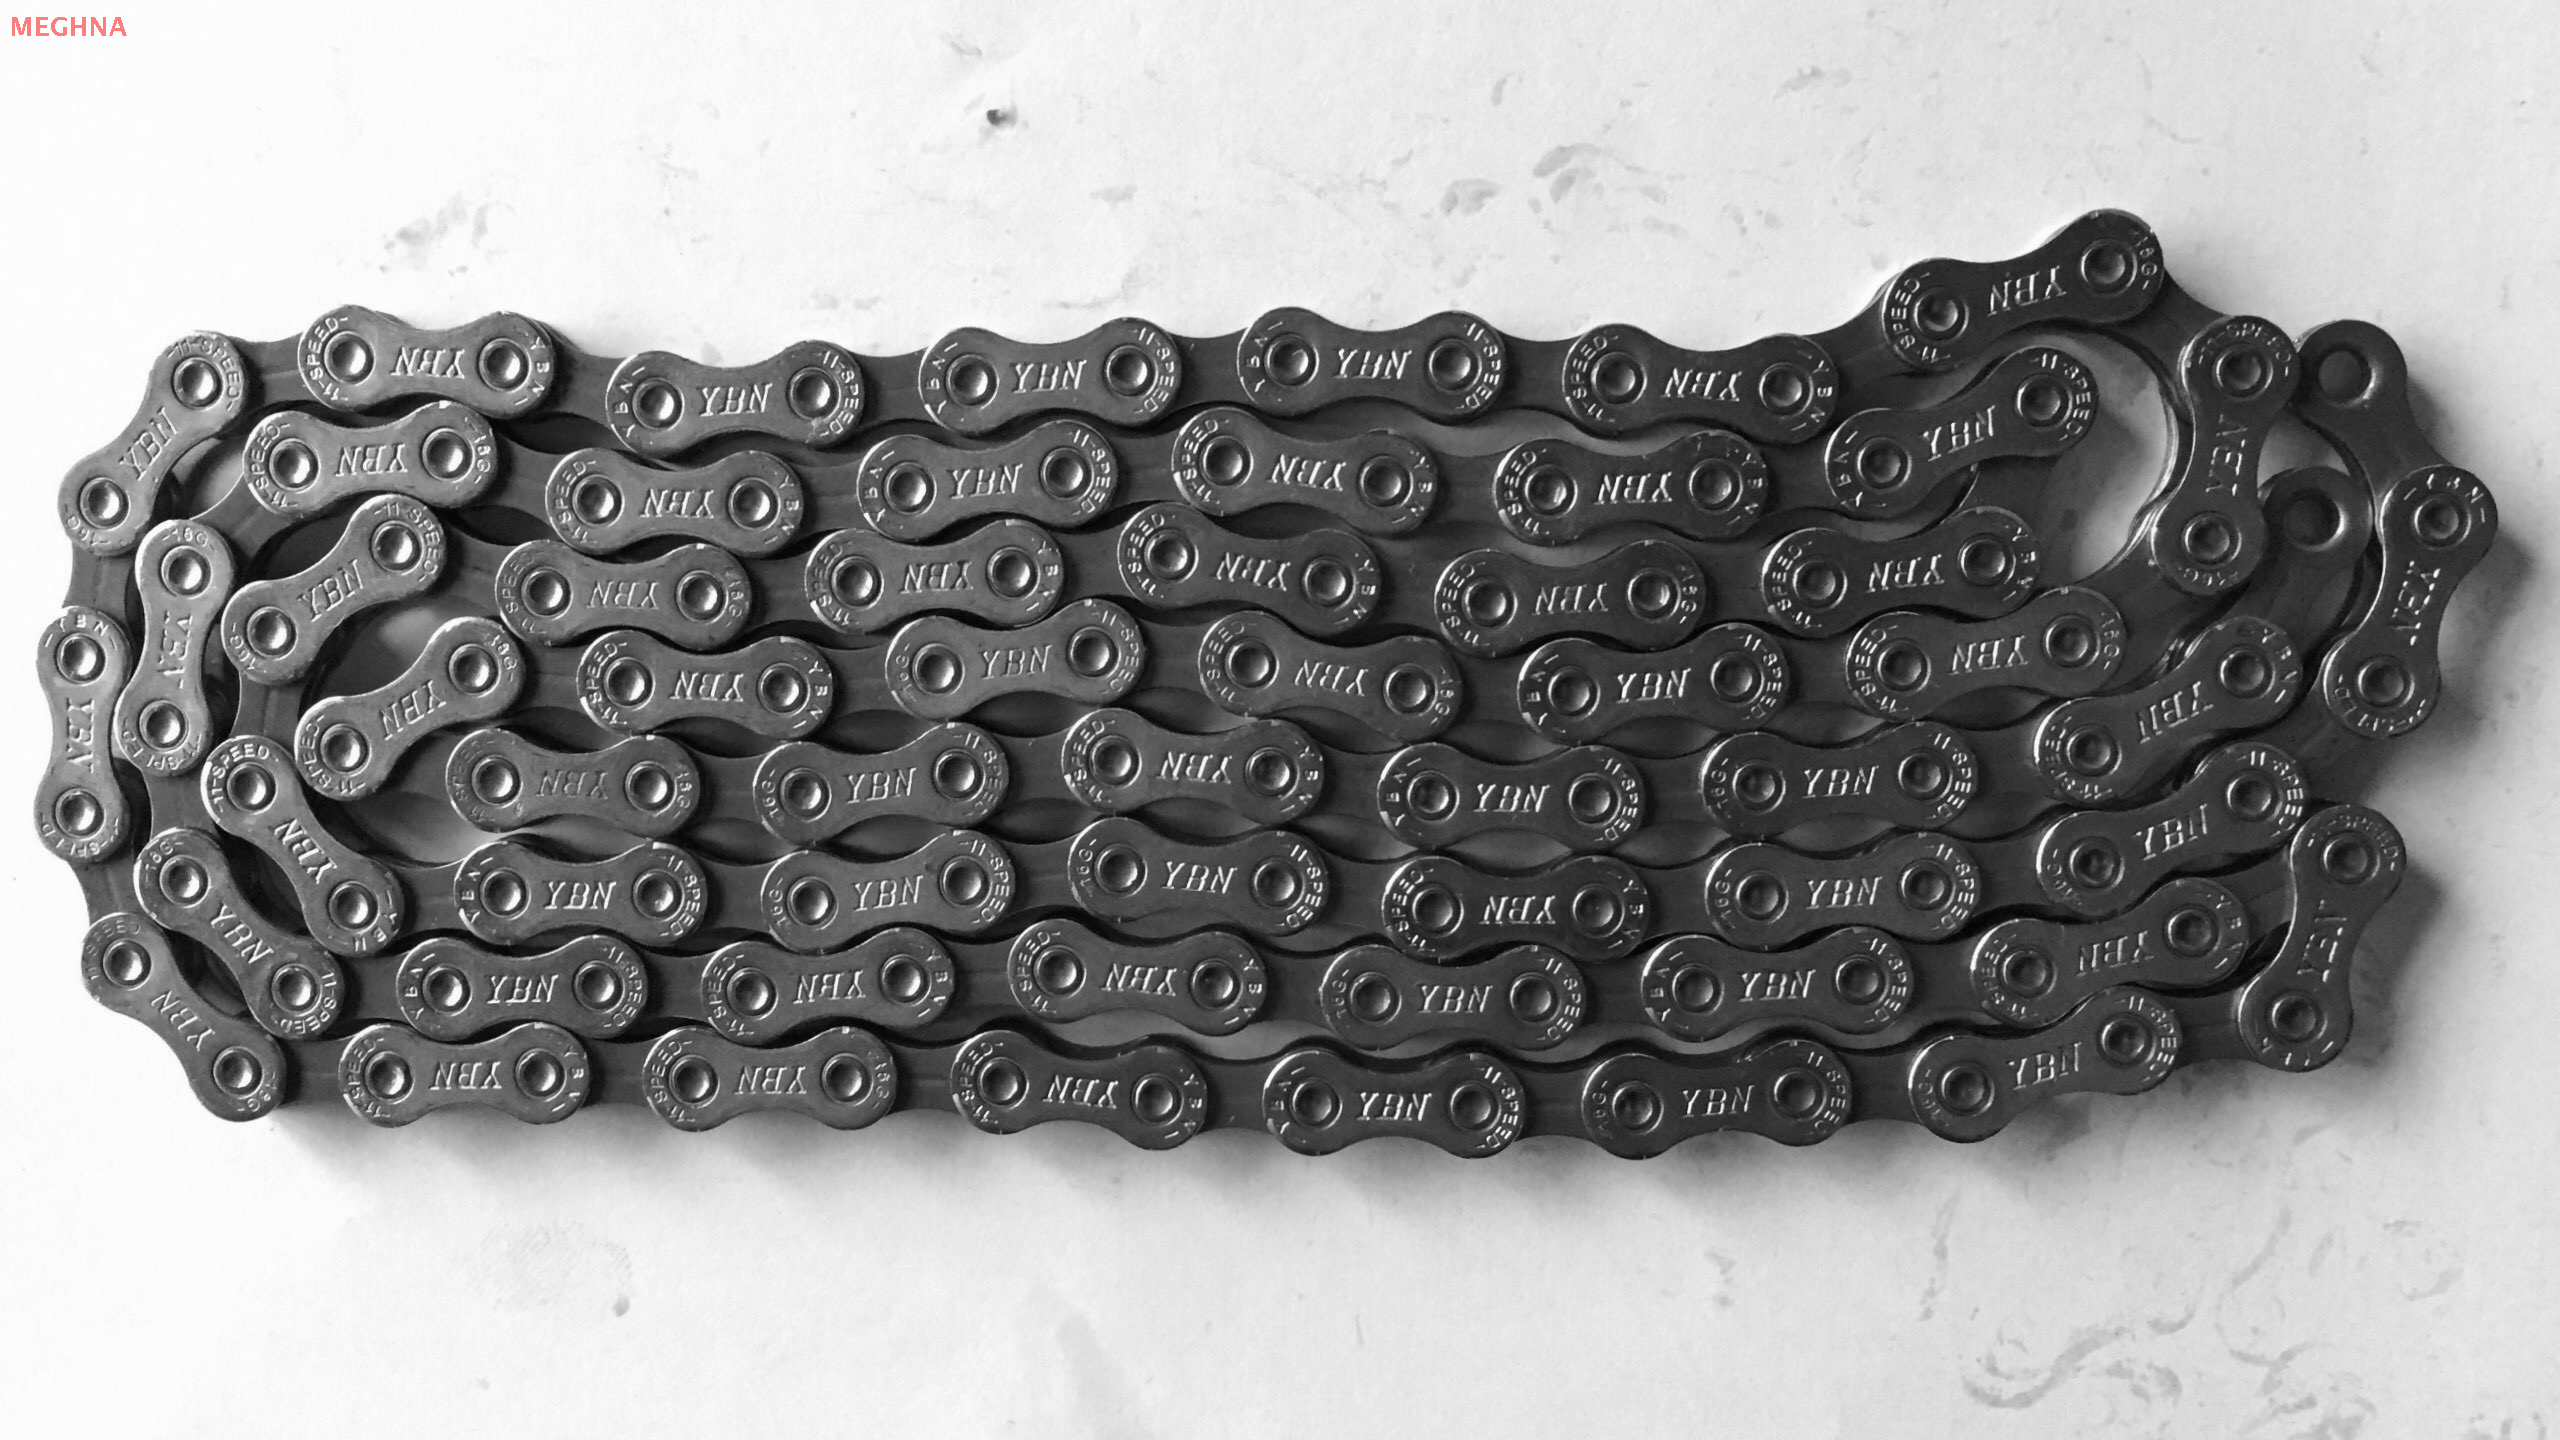 S11 11 speed bicycle chain